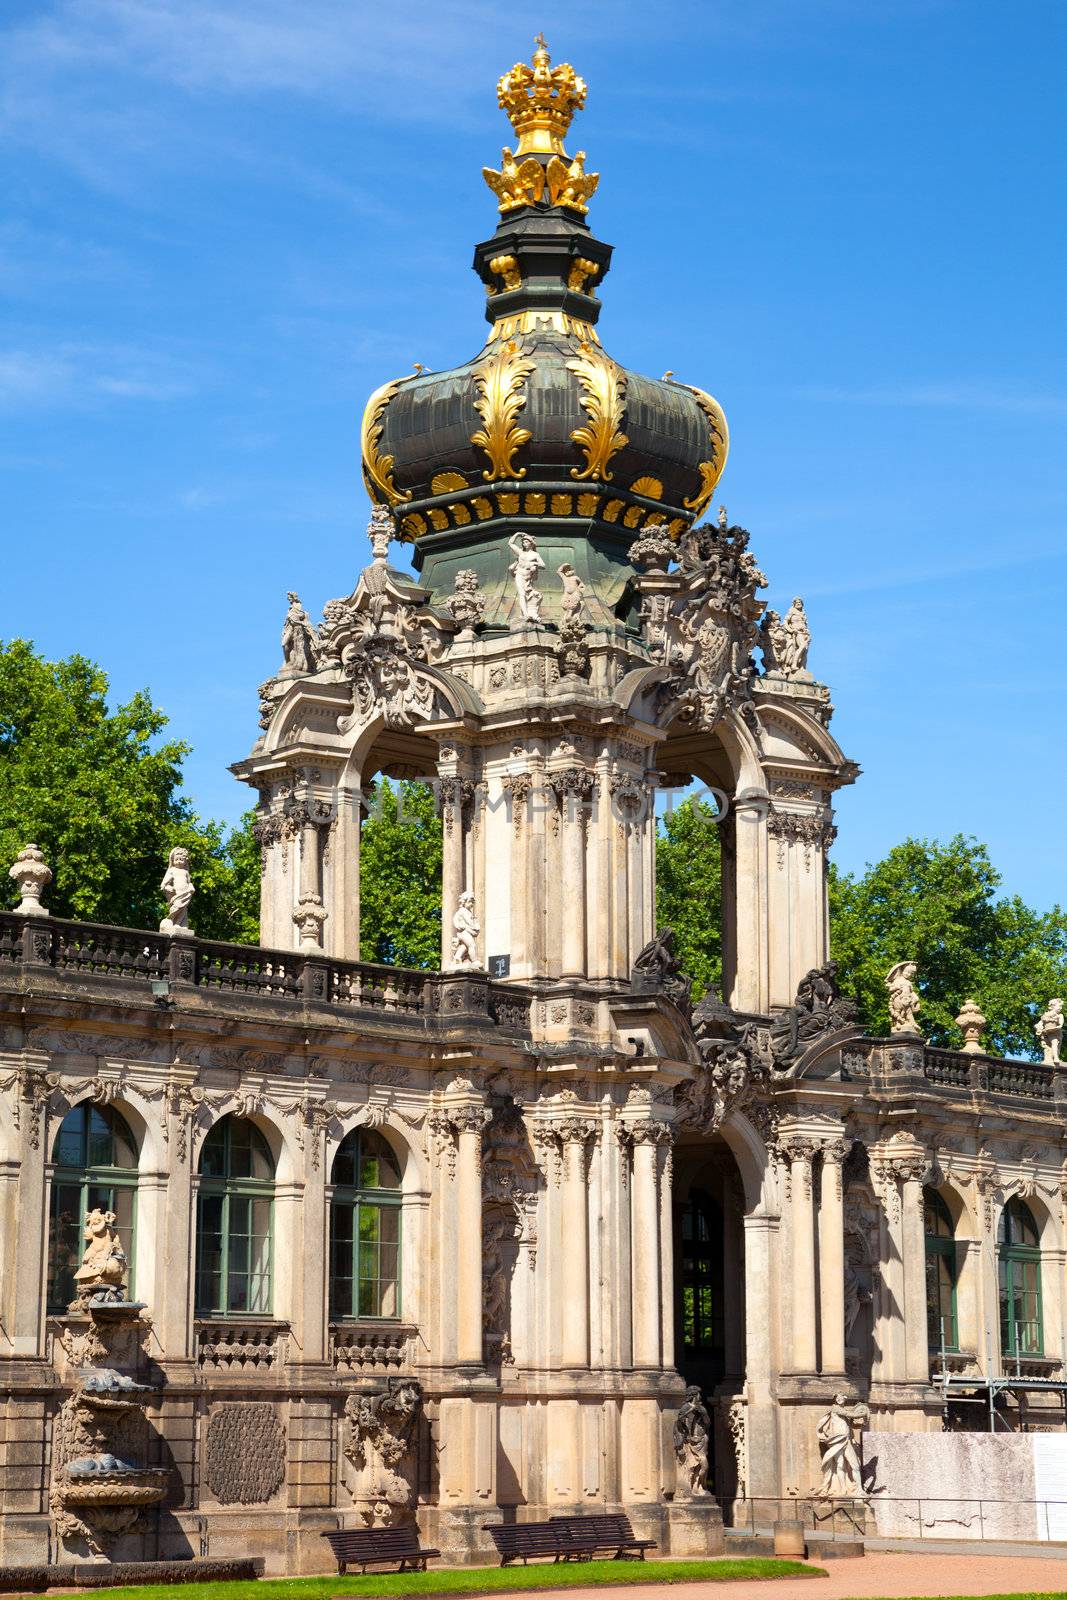 The Zwinger palace of Dresden. eastern Germany, built in Rococo style.